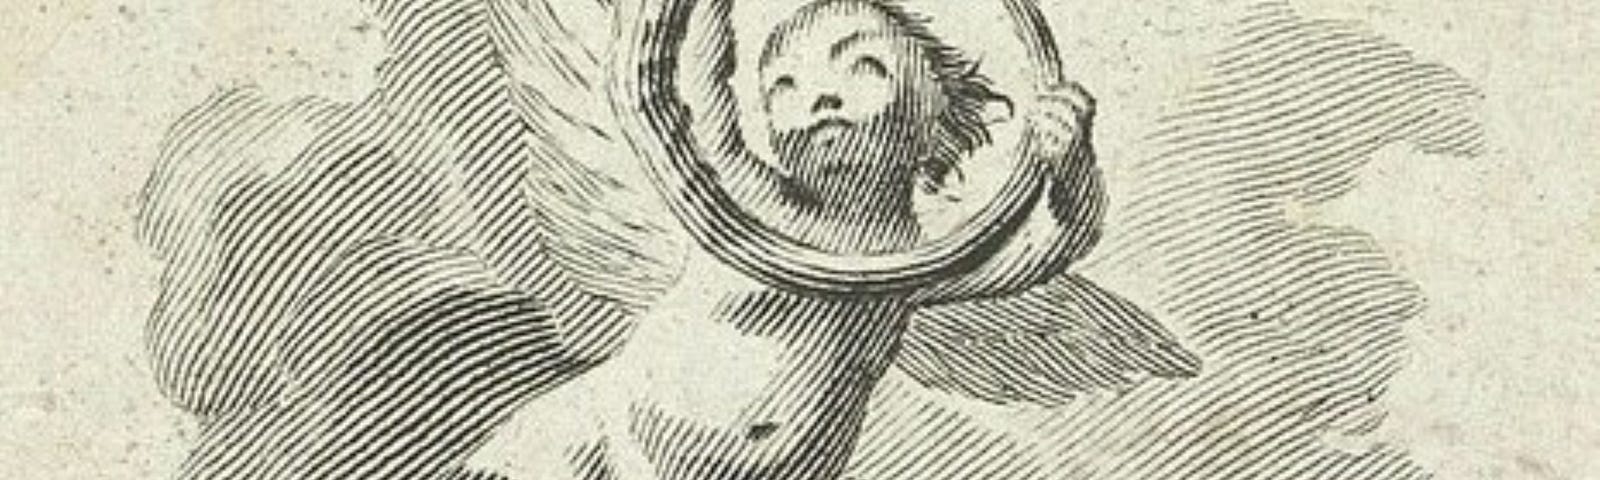 Line drawing of a cherub holding up an Ouroboros, a snake eating its own tail.